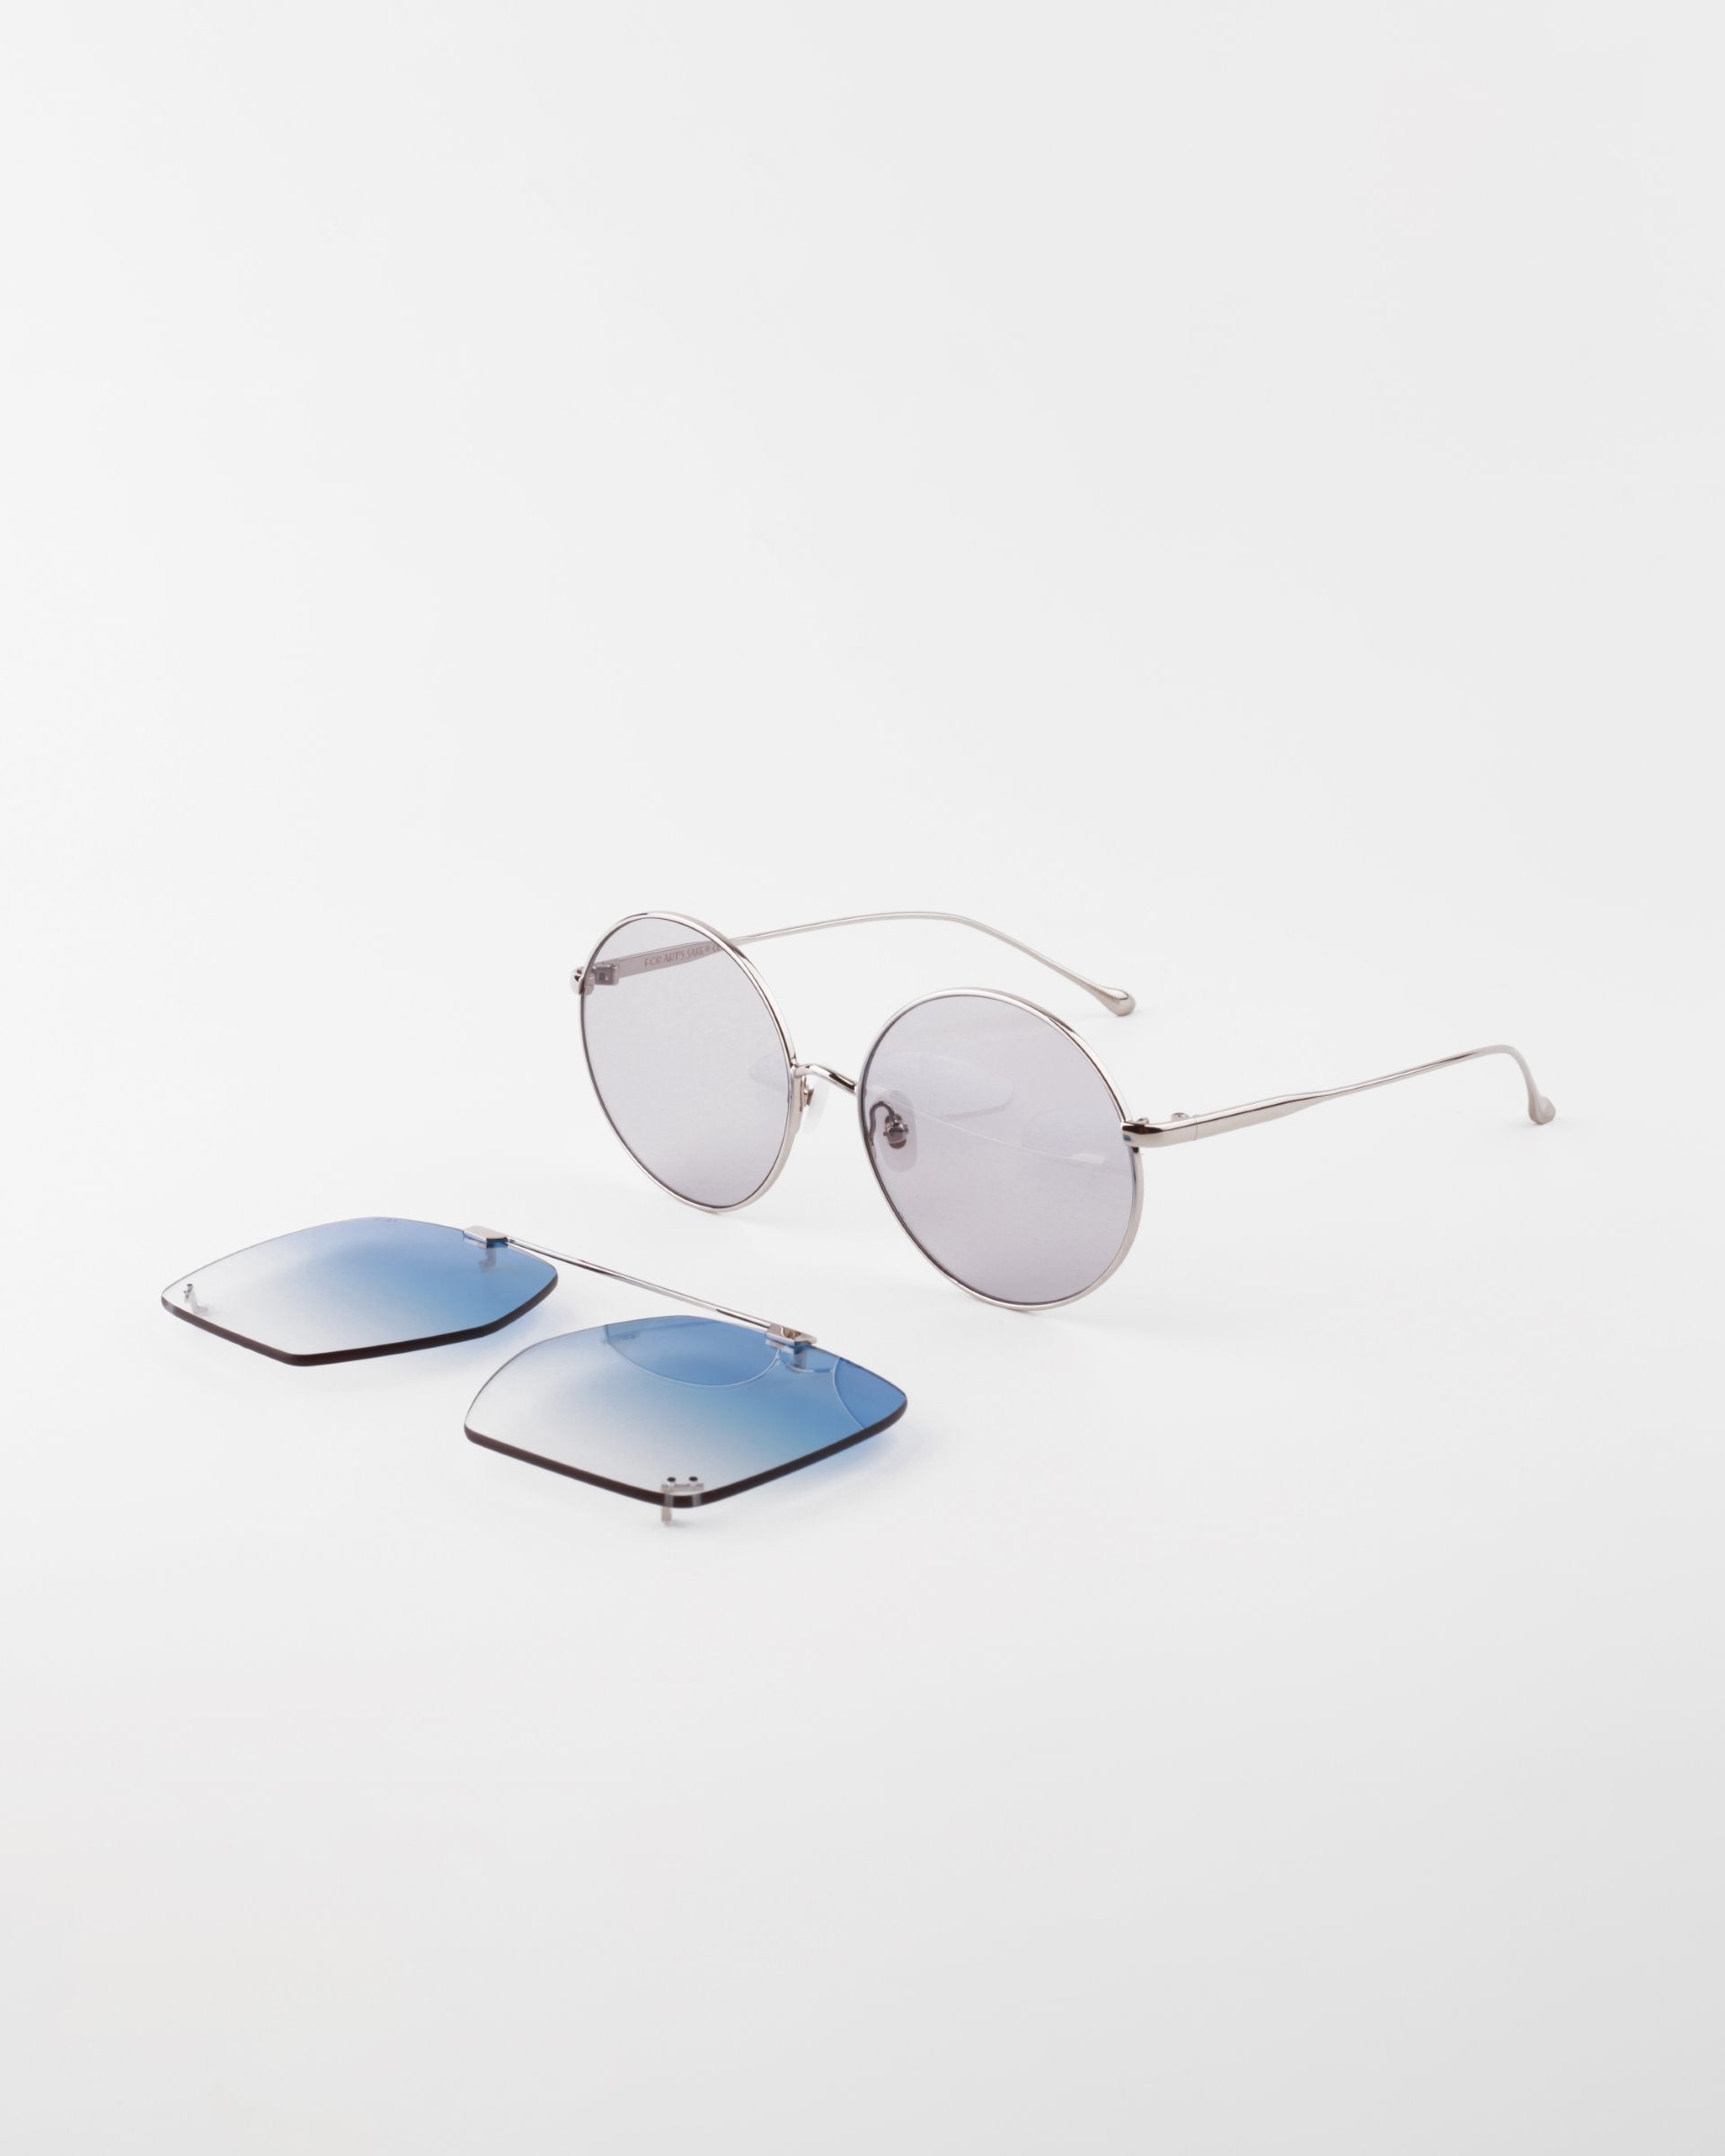 A pair of round, silver-framed eyeglasses with detachable blue-tinted sun lenses on a white background. The For Art&#39;s Sake® Last Summer detachable aviator frame offers reversible functionality, with the blue-tinted lenses positioned in front of the glasses for UVA &amp; UVB protection.